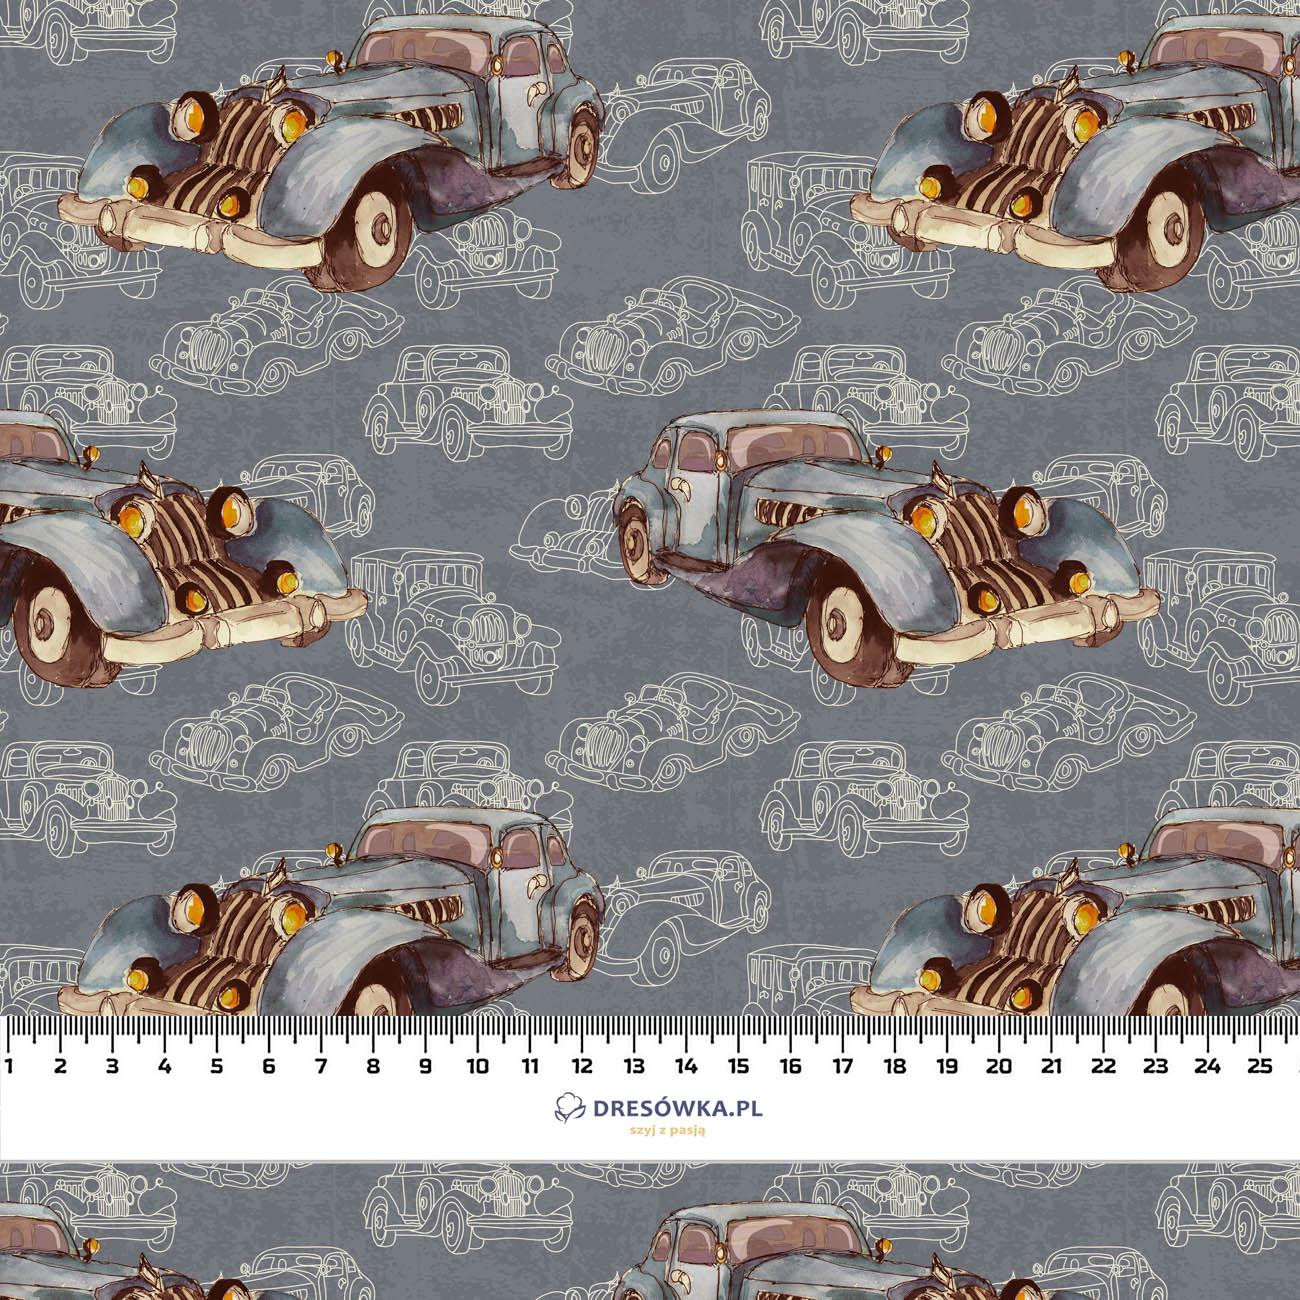 OLD CARS pat. 1 - Cotton woven fabric